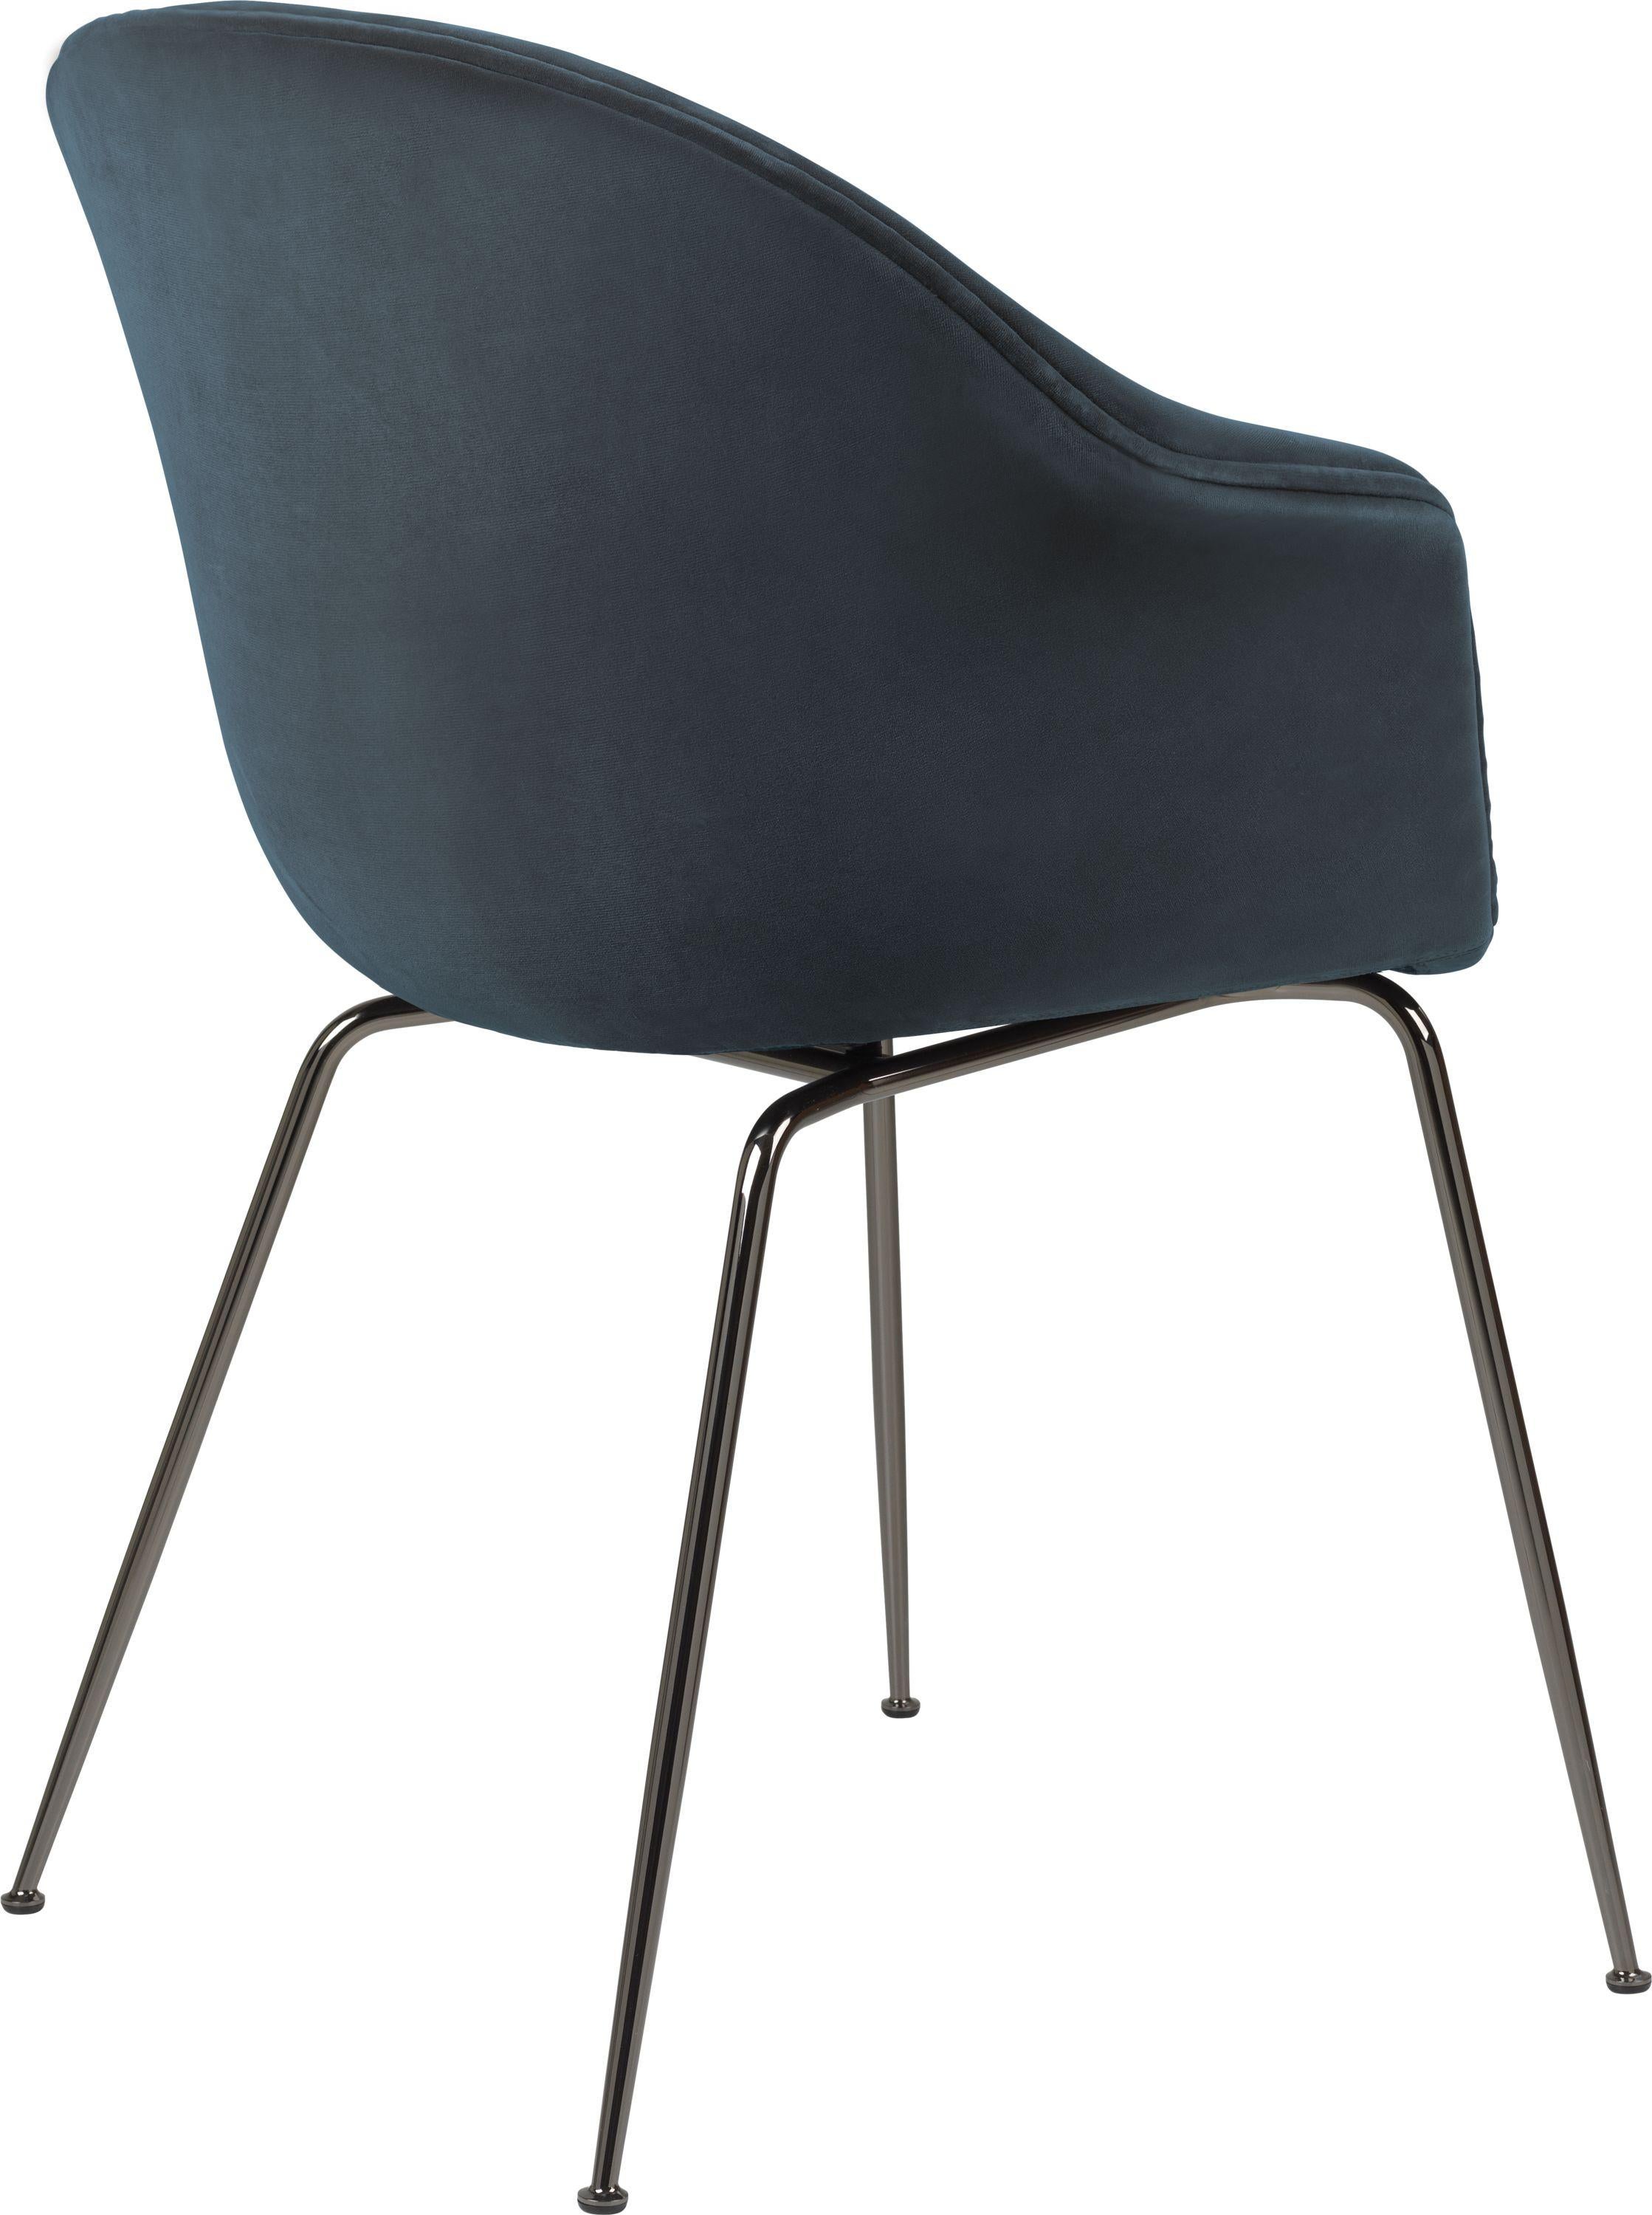 GamFratesi 'Bat' dining chair in navy with black chrome conic base. Designed by Danish-Italian design-duo GamFratesi in 2018, the Bat dining chair is created with a Scandinavian approach to crafts, simplicity, and functionalism. Executed in metal